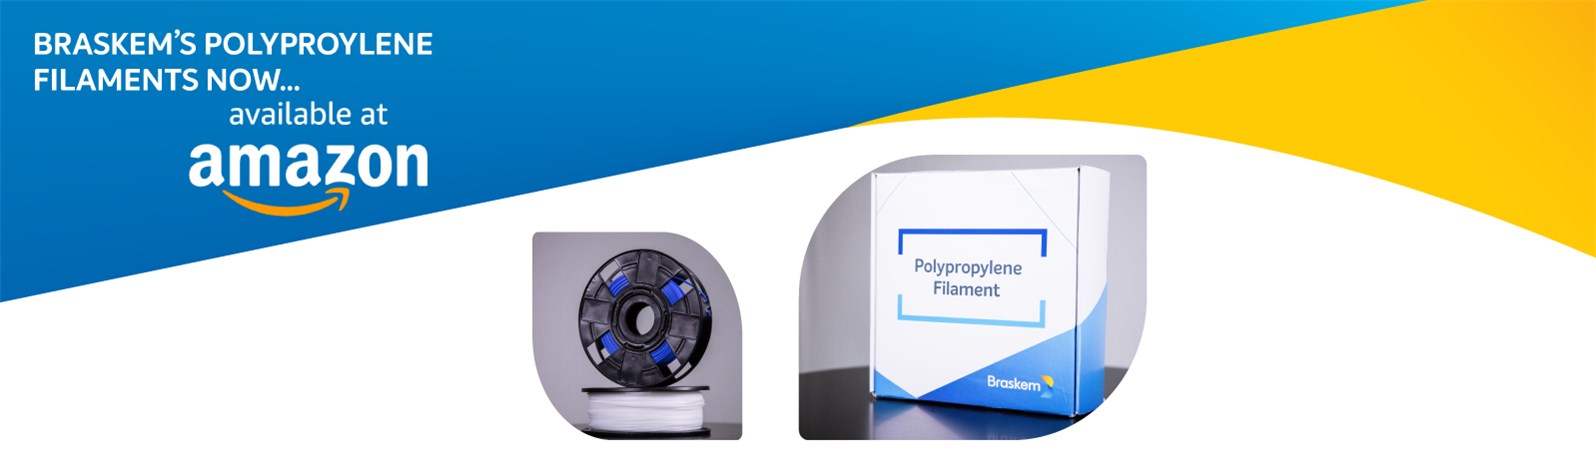 For the first time consumers are able to purchase Polypropylene Filaments for 3D Printing on Amazon.